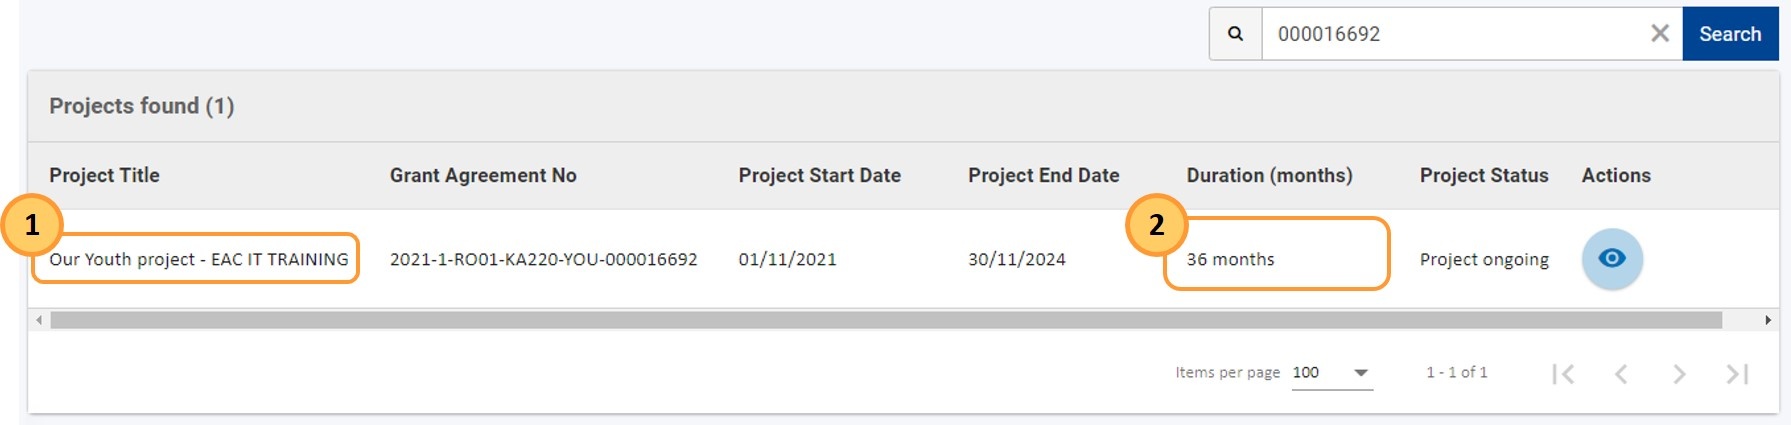 Header of project, project title and duration should change